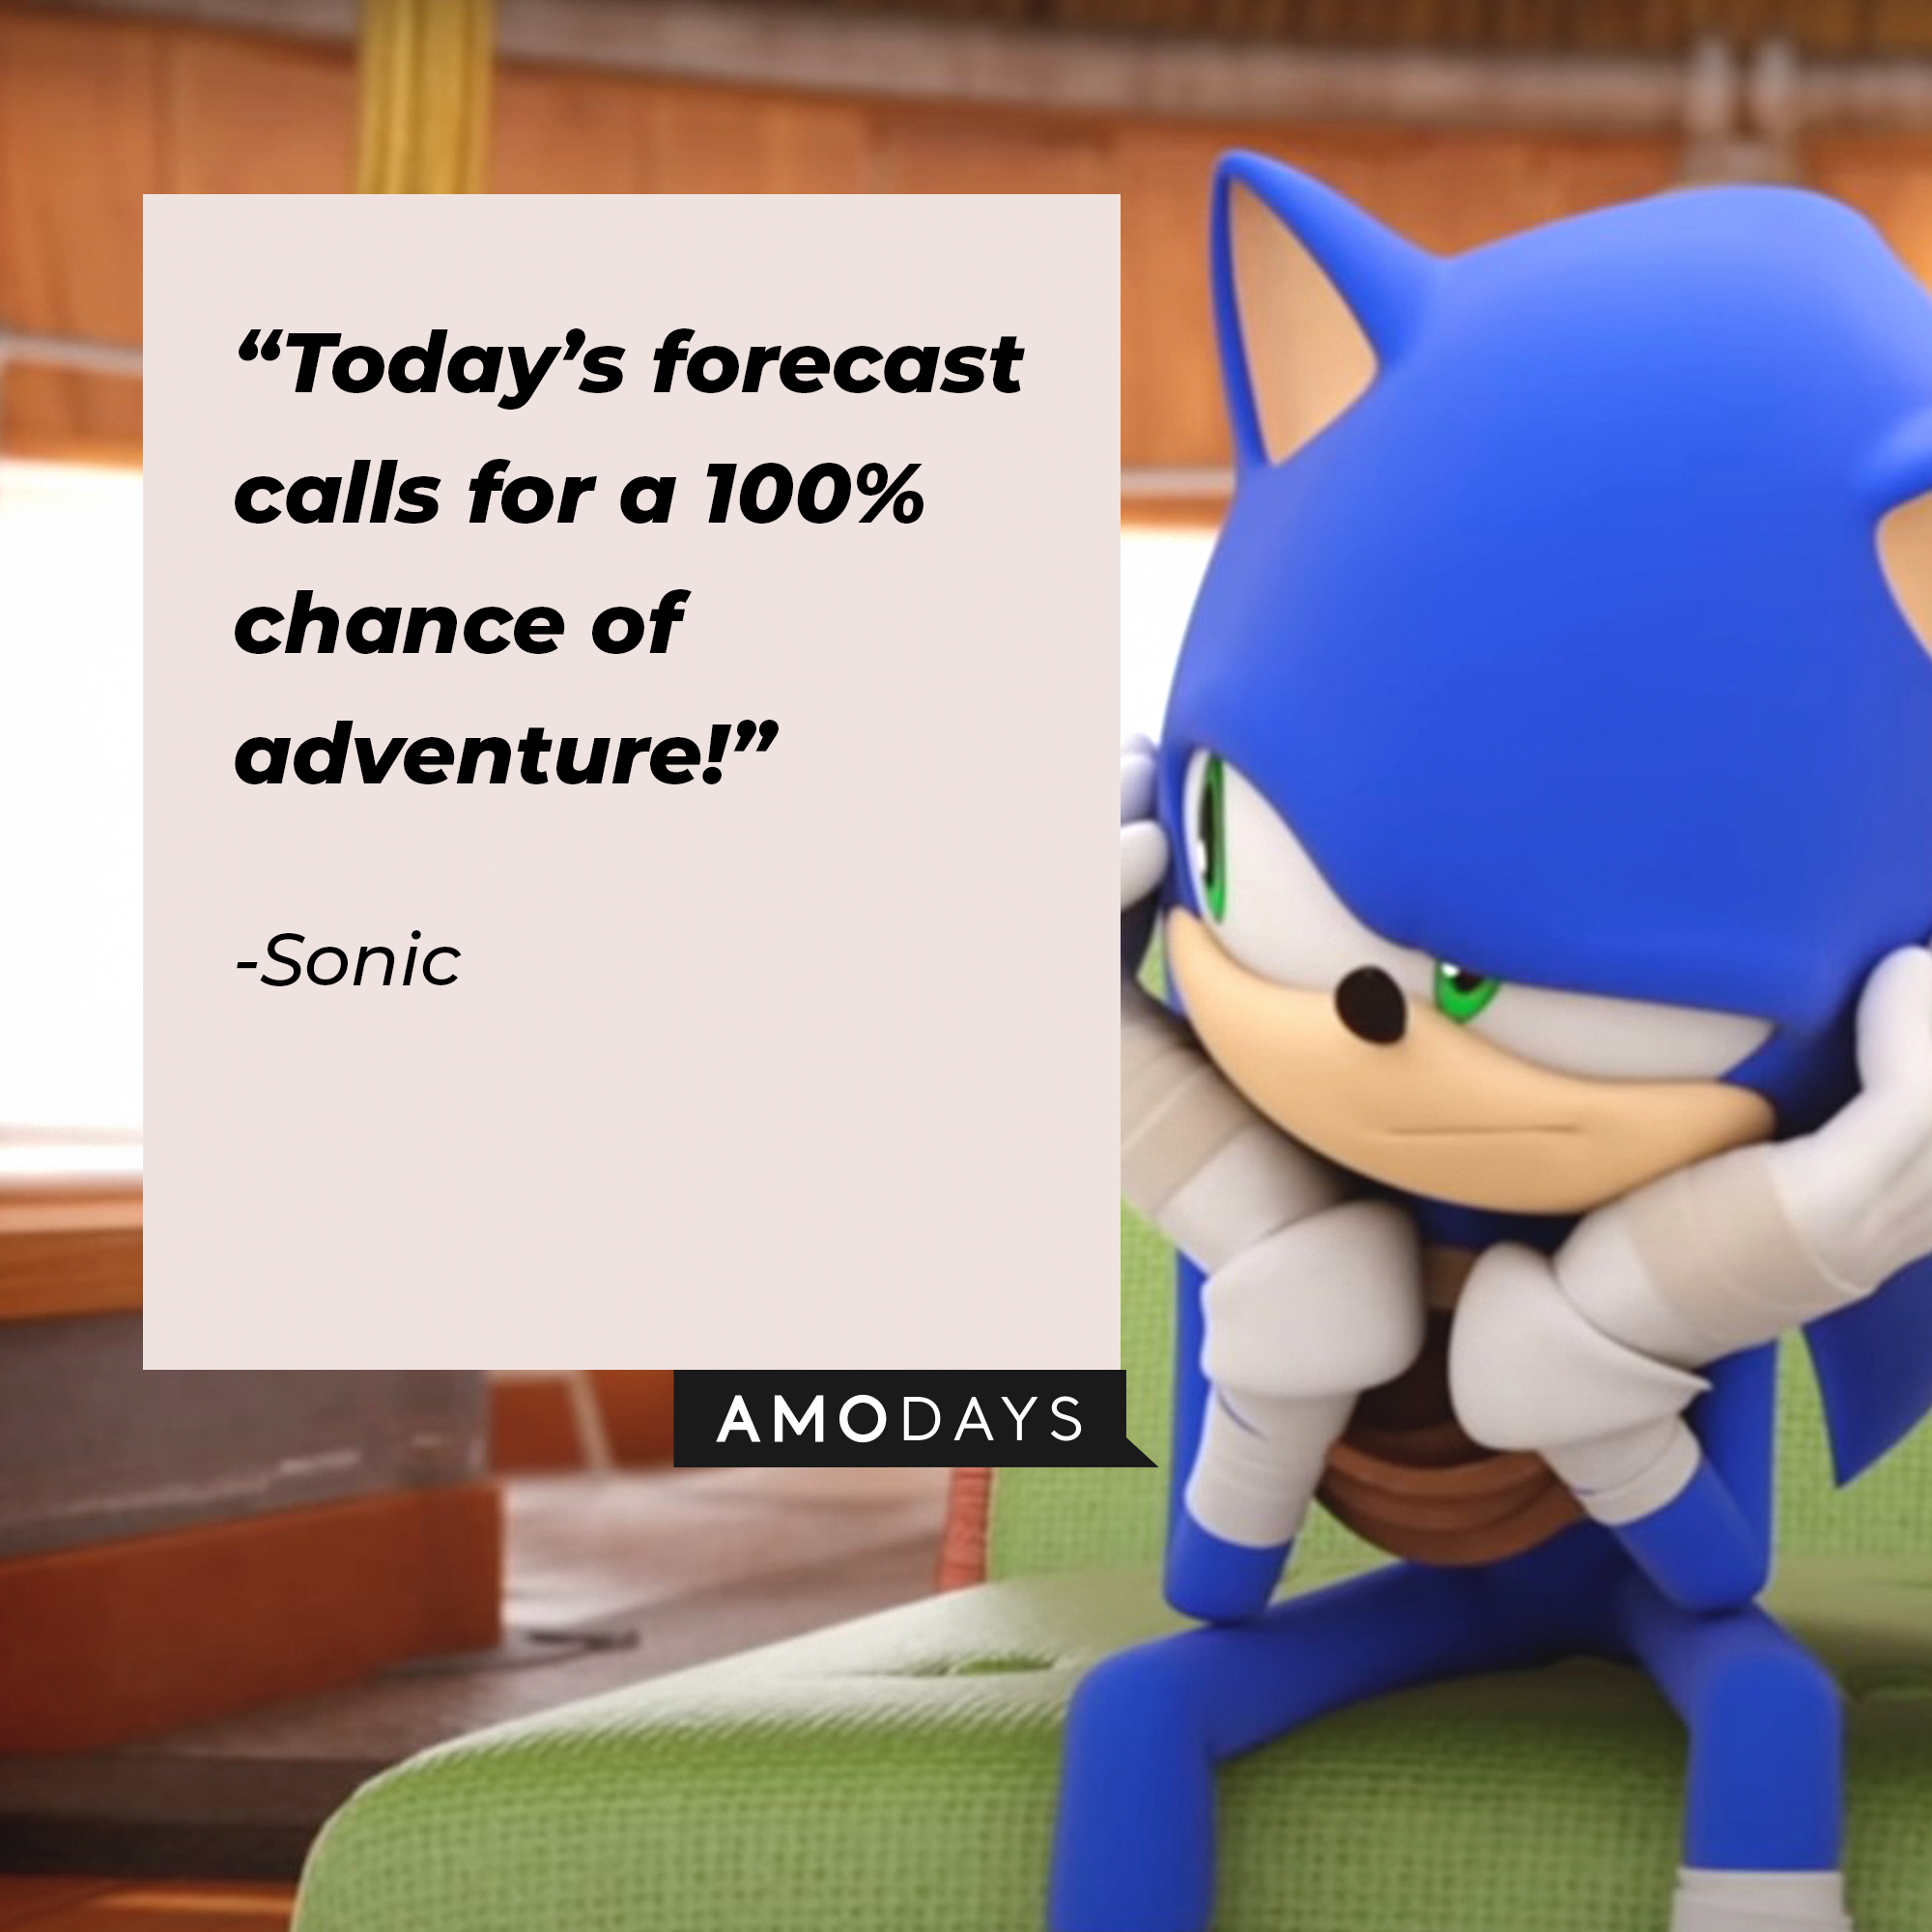 An image of Sonic the Hedgehog with his quote:“Today’s forecast calls for a 100% chance of adventure!” | Source: youtube.com/Sonic.Boom_Official